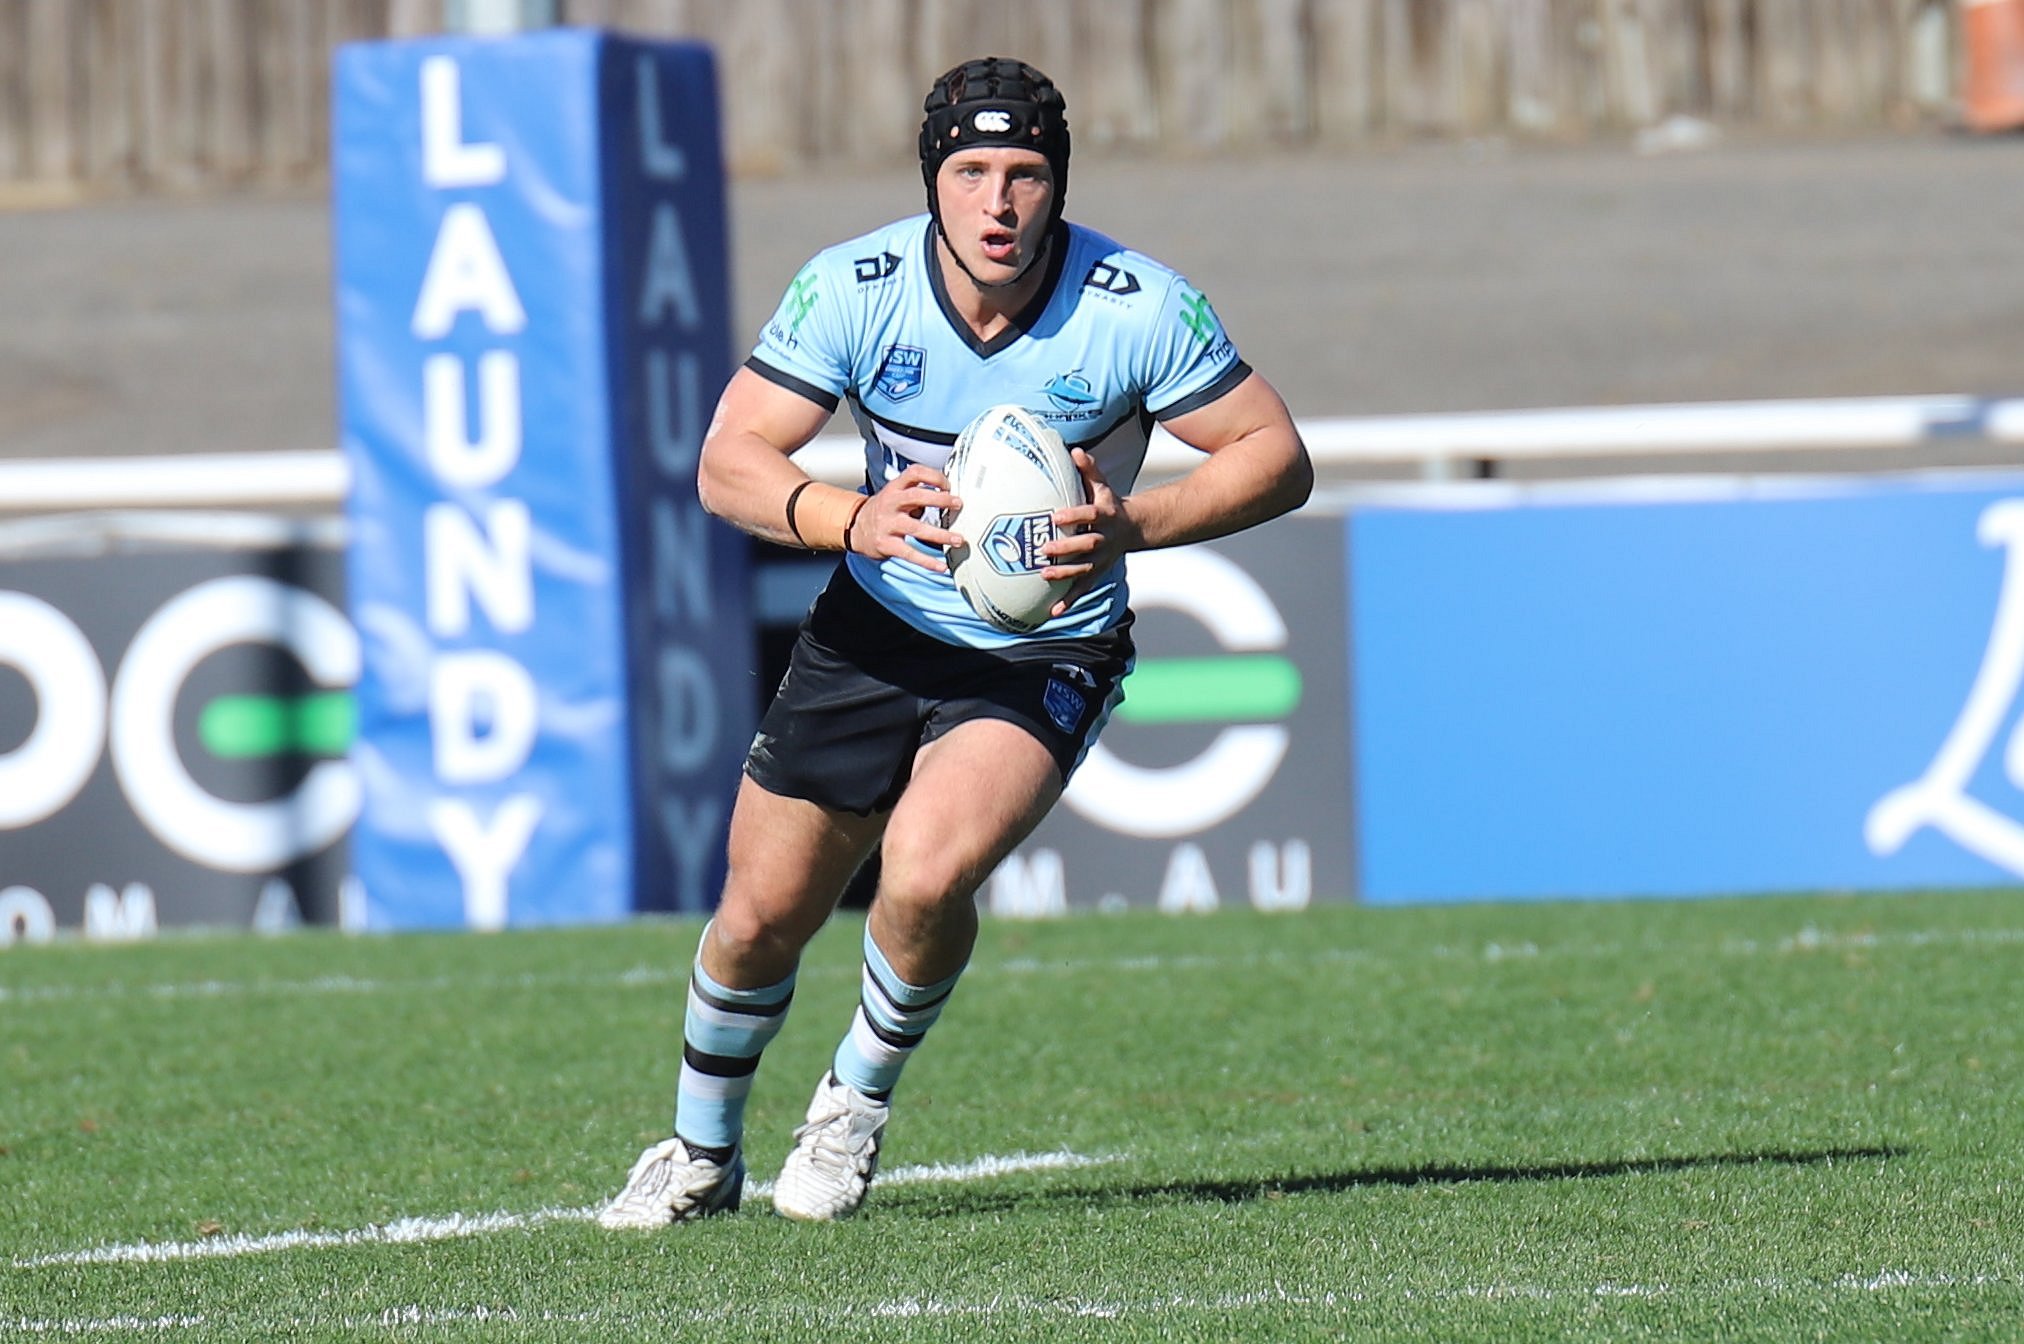 Jack Boyling - Cronulla Sharks 2021 Jersey Flegg Cup Player of the Year (Photo's : Steve Montgomery)